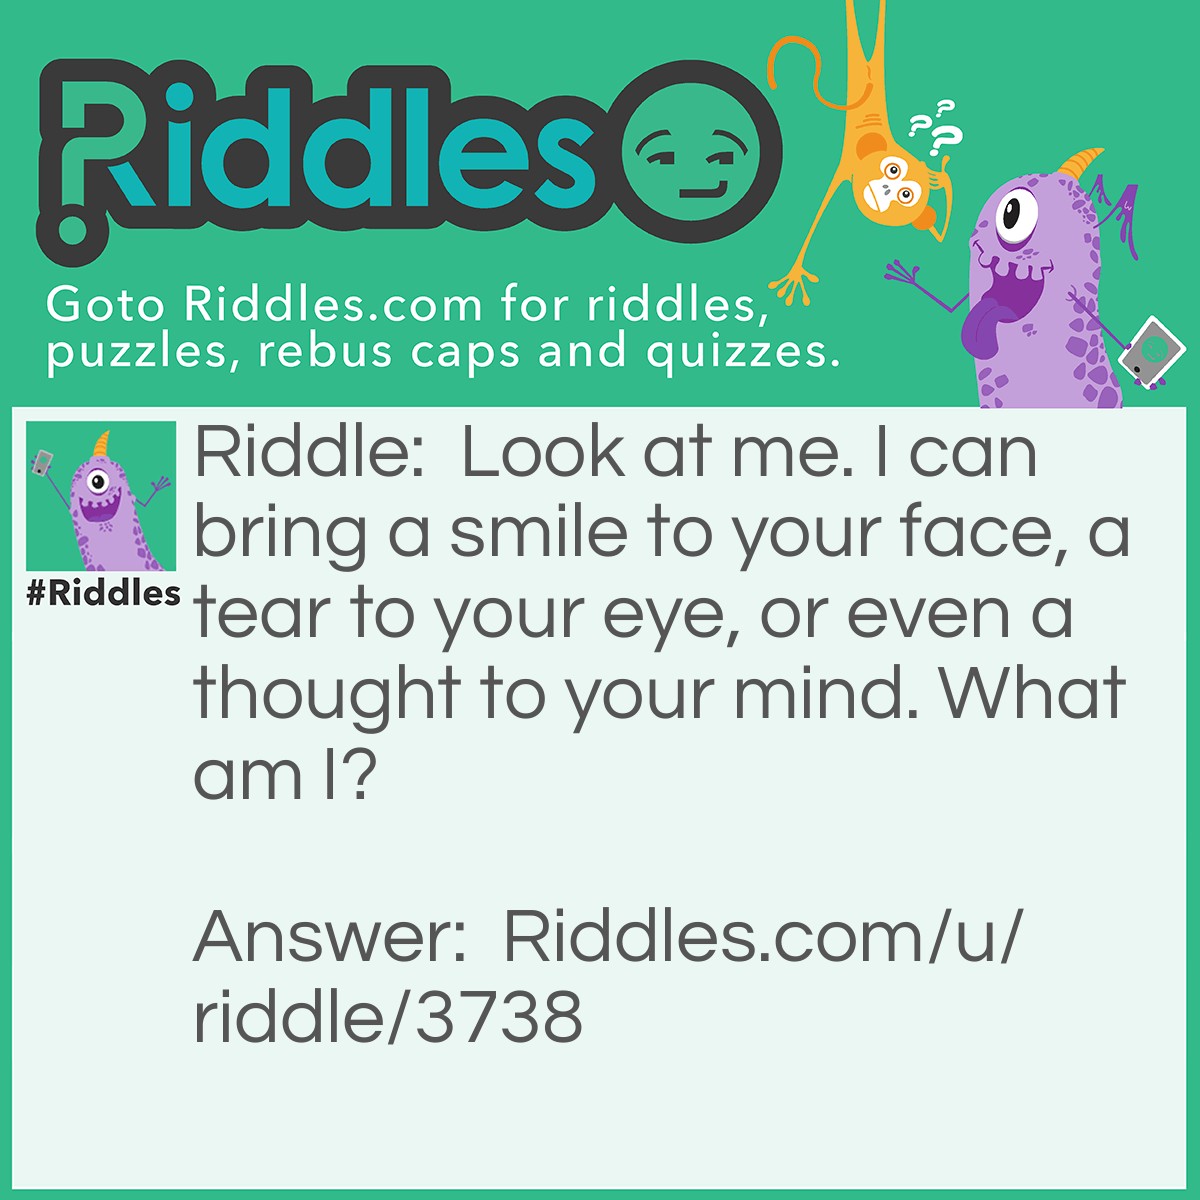 Riddle: Look at me. I can bring a smile to your face, a tear to your eye, or even a thought to your mind. What am I? Answer: Memories.